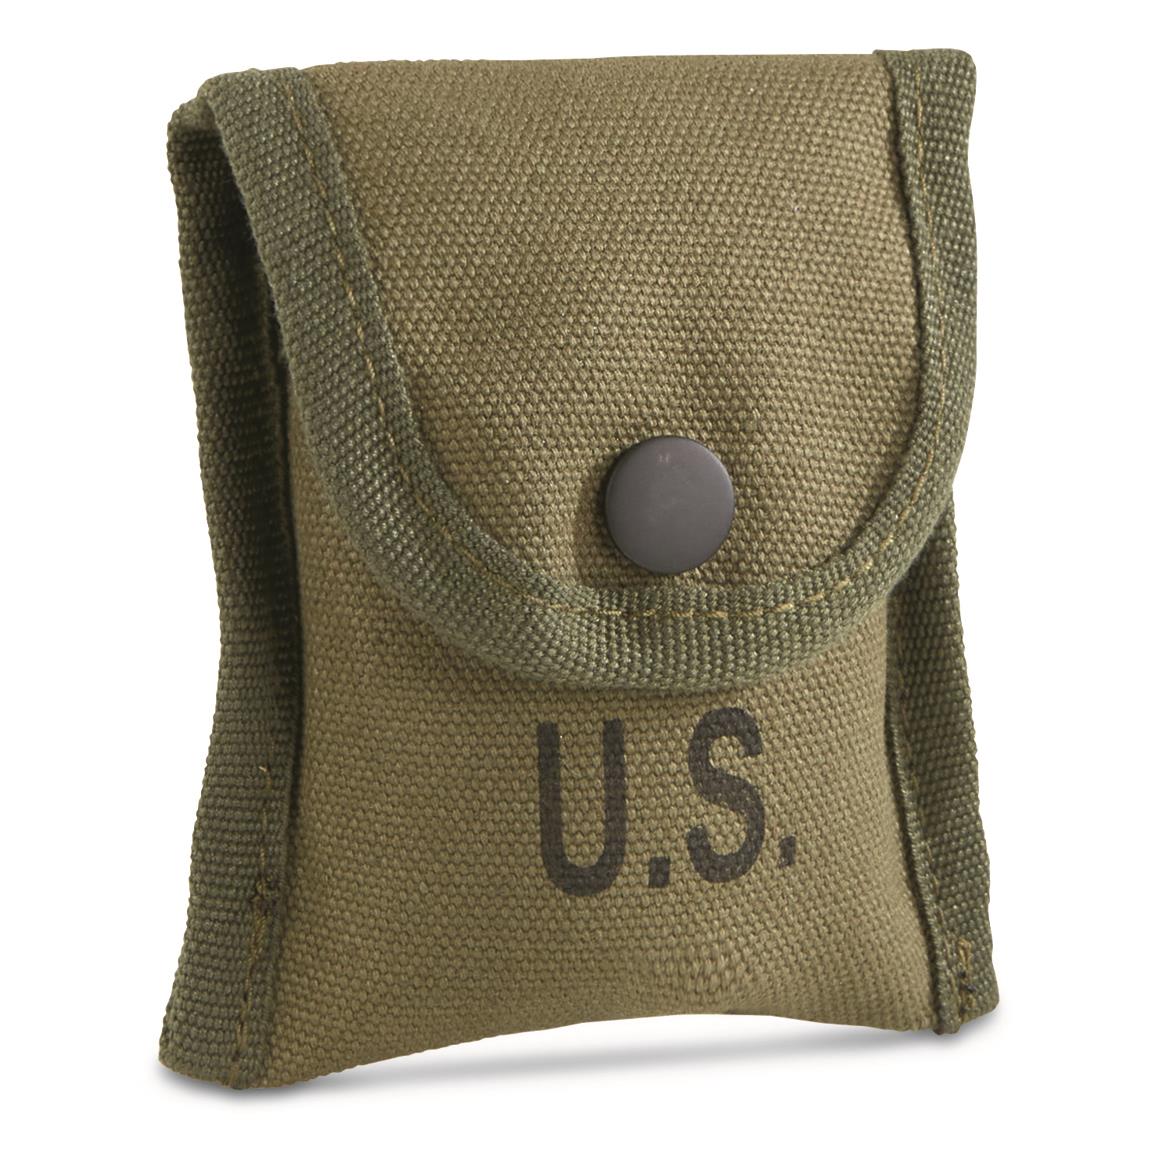 U.S. Military Canvas First Aid Compass Pouch, Reproduction, Olive Drab